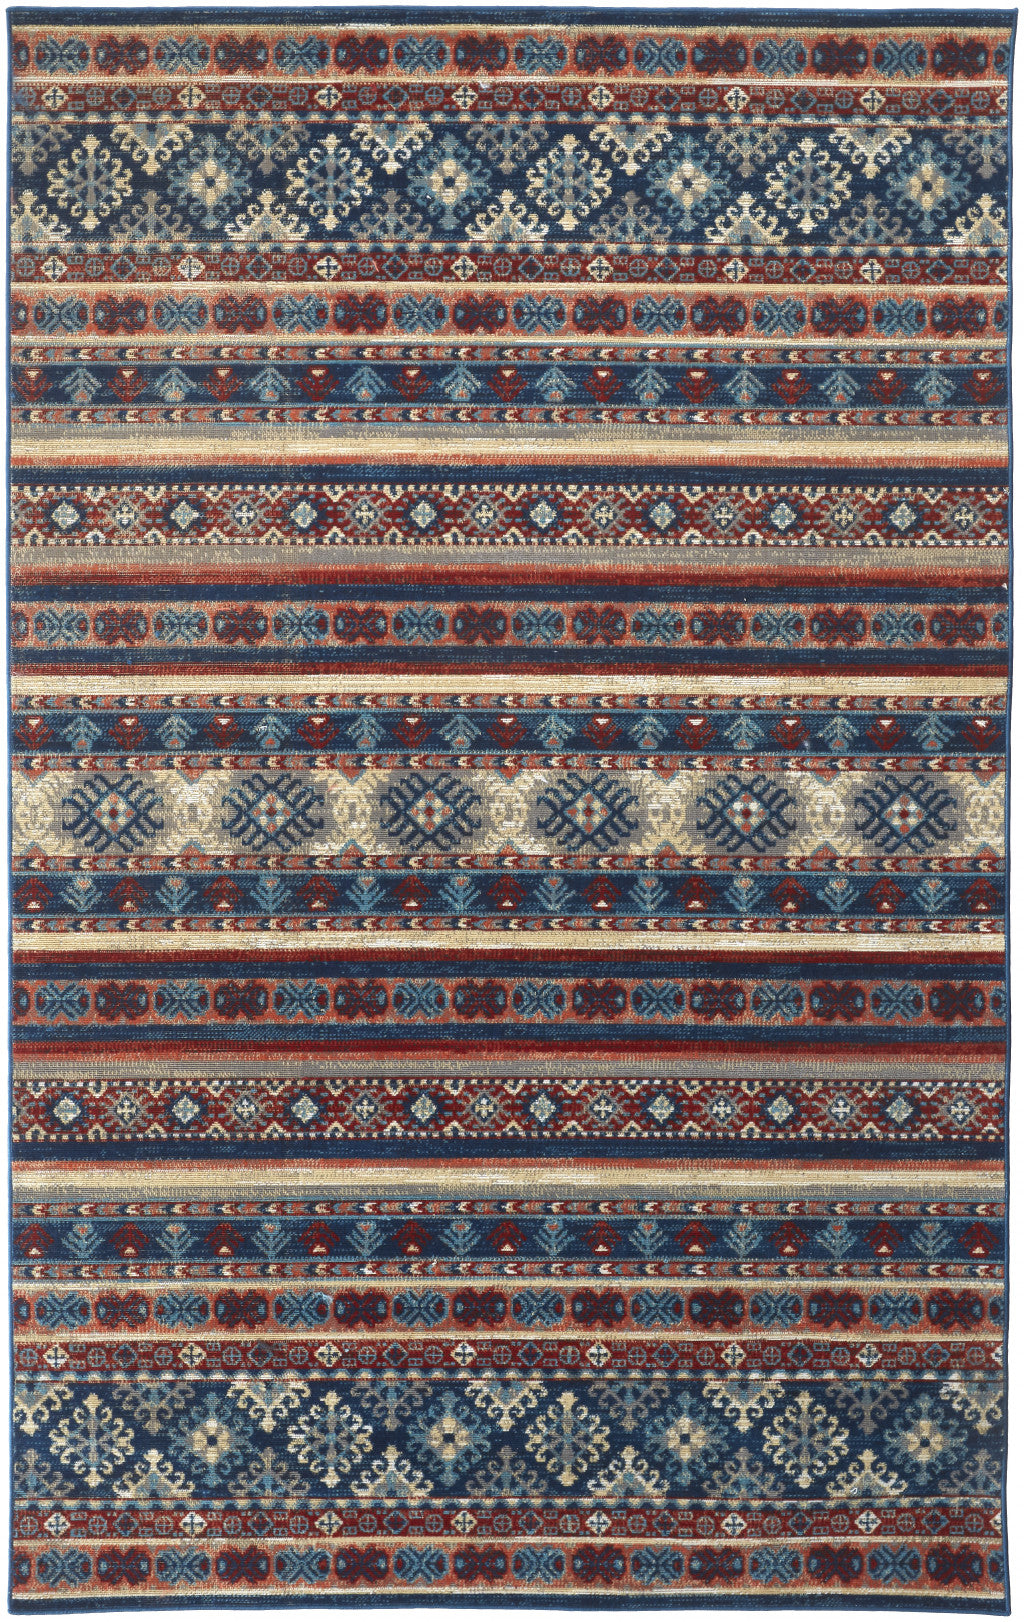 4' X 6' Blue Tan And Black Geometric Power Loom Distressed Stain Resistant Area Rug